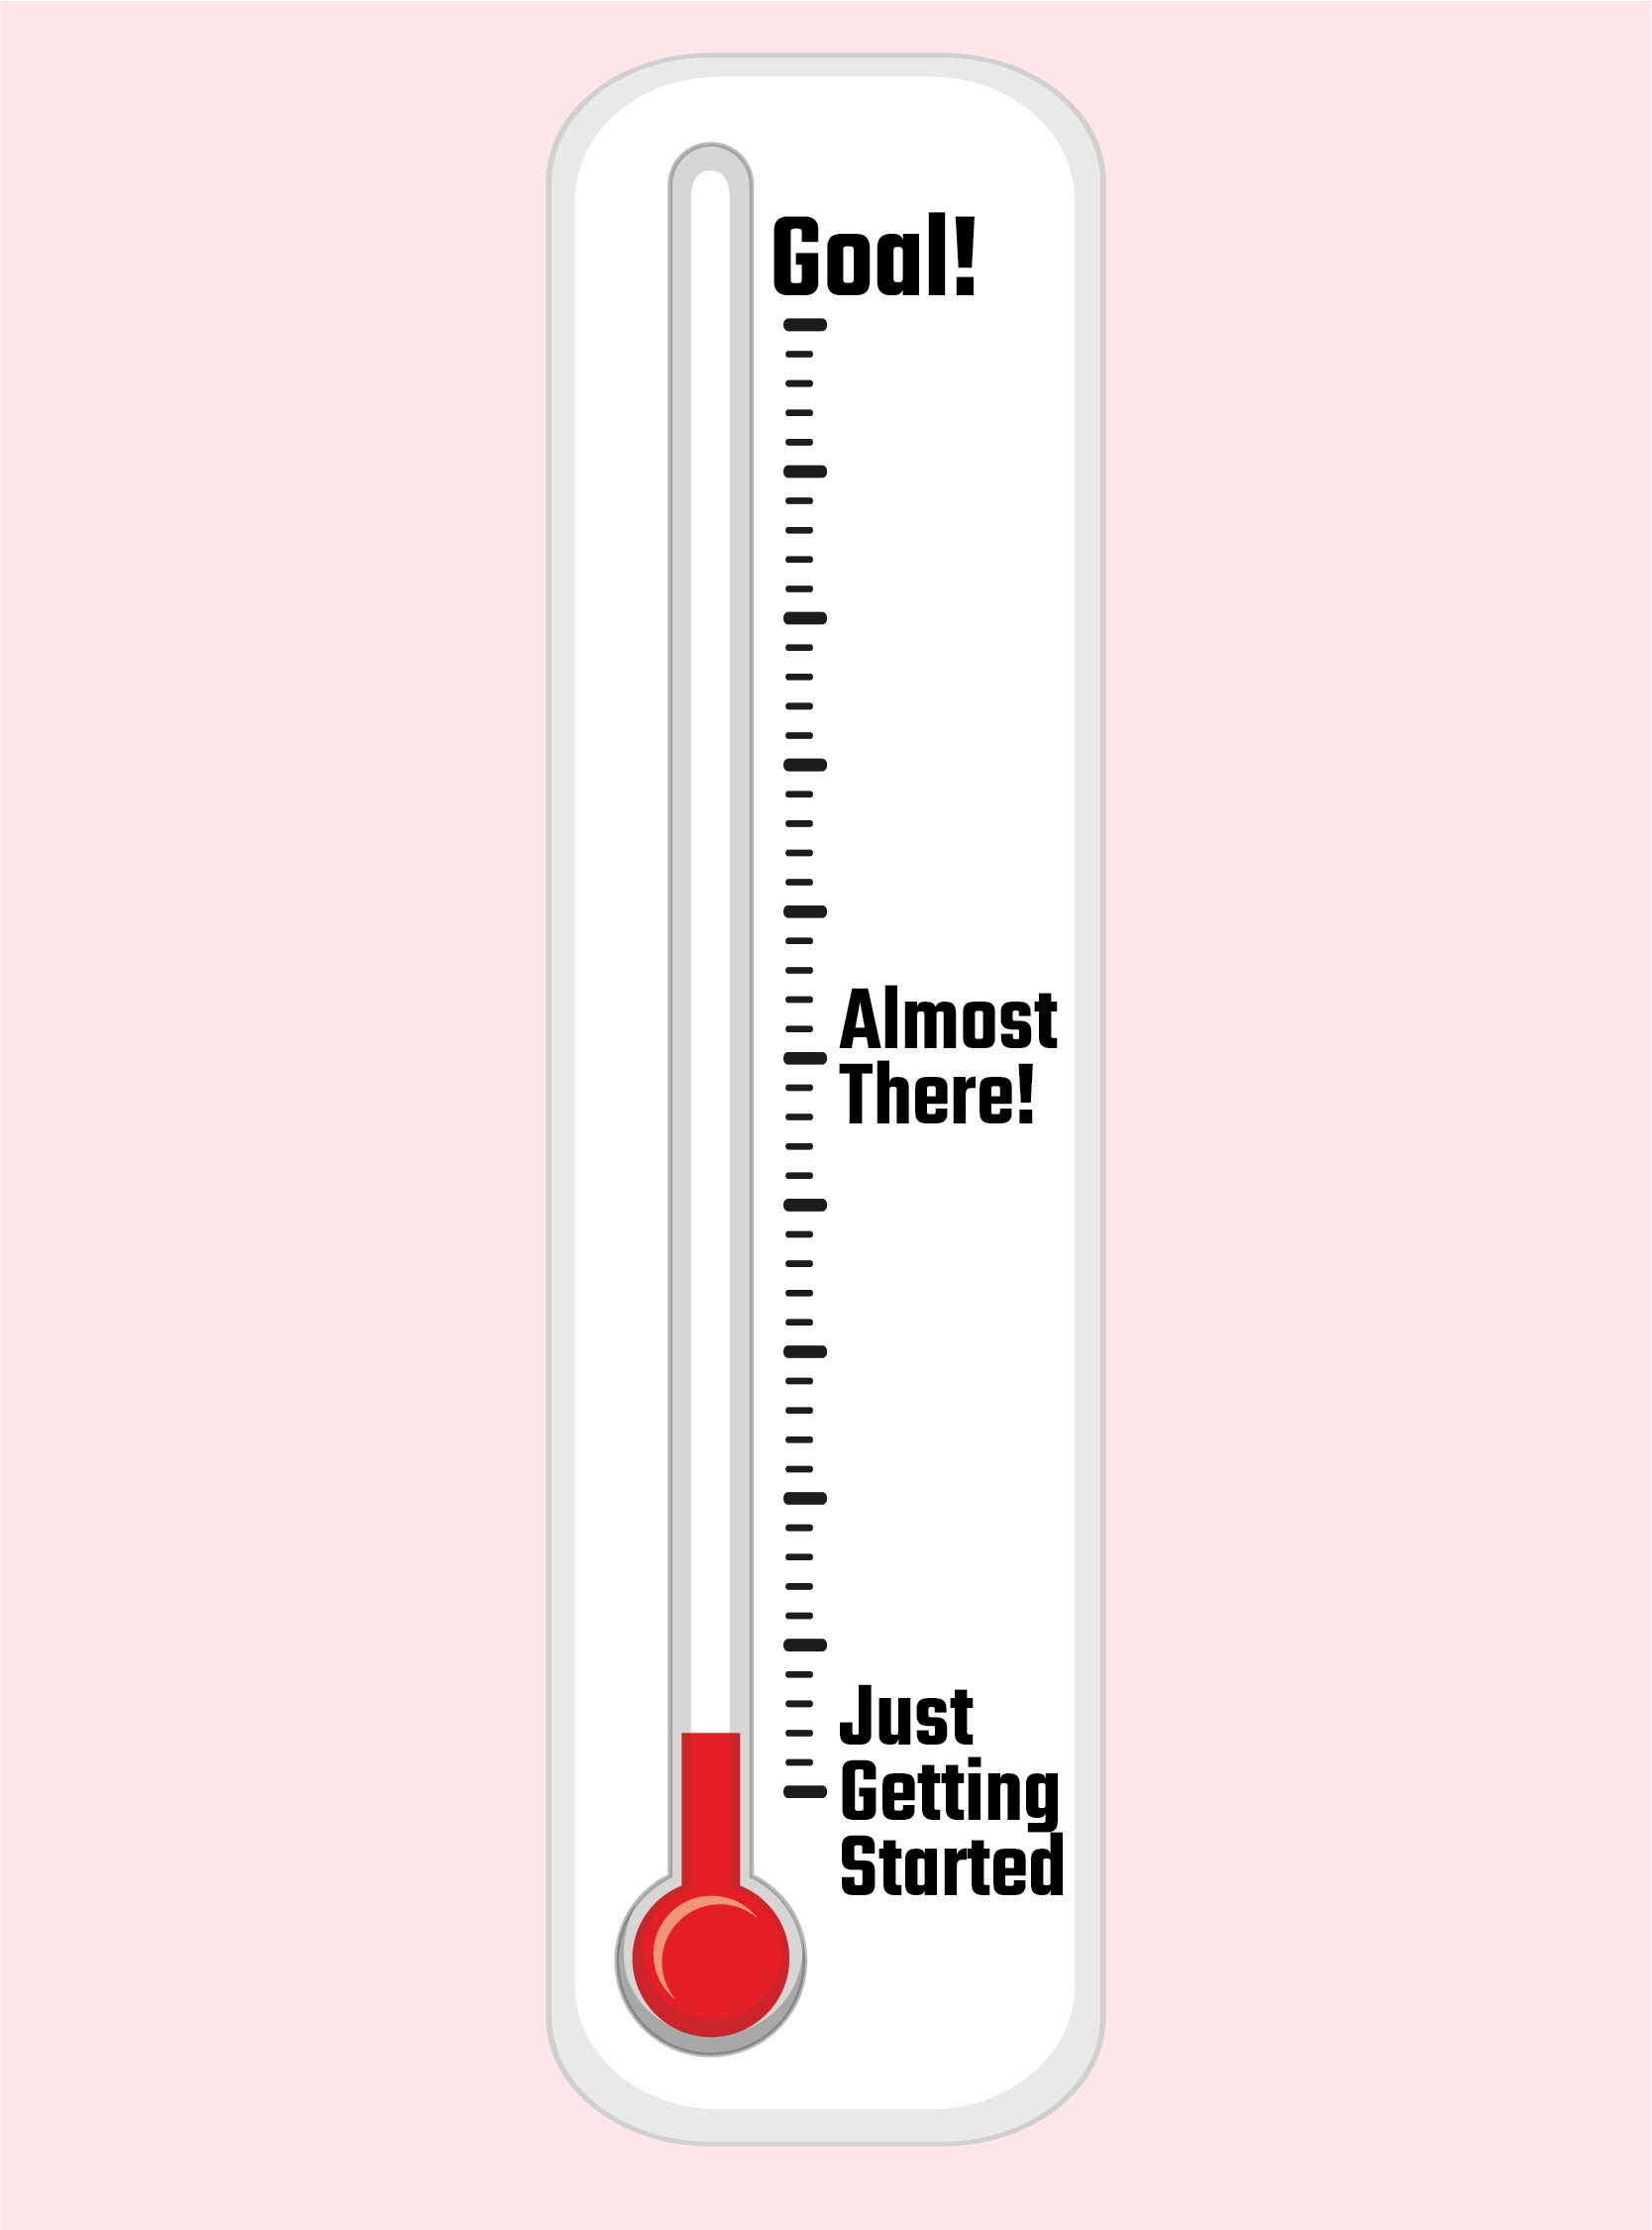 Printable Fundraising Goal Thermometer Template